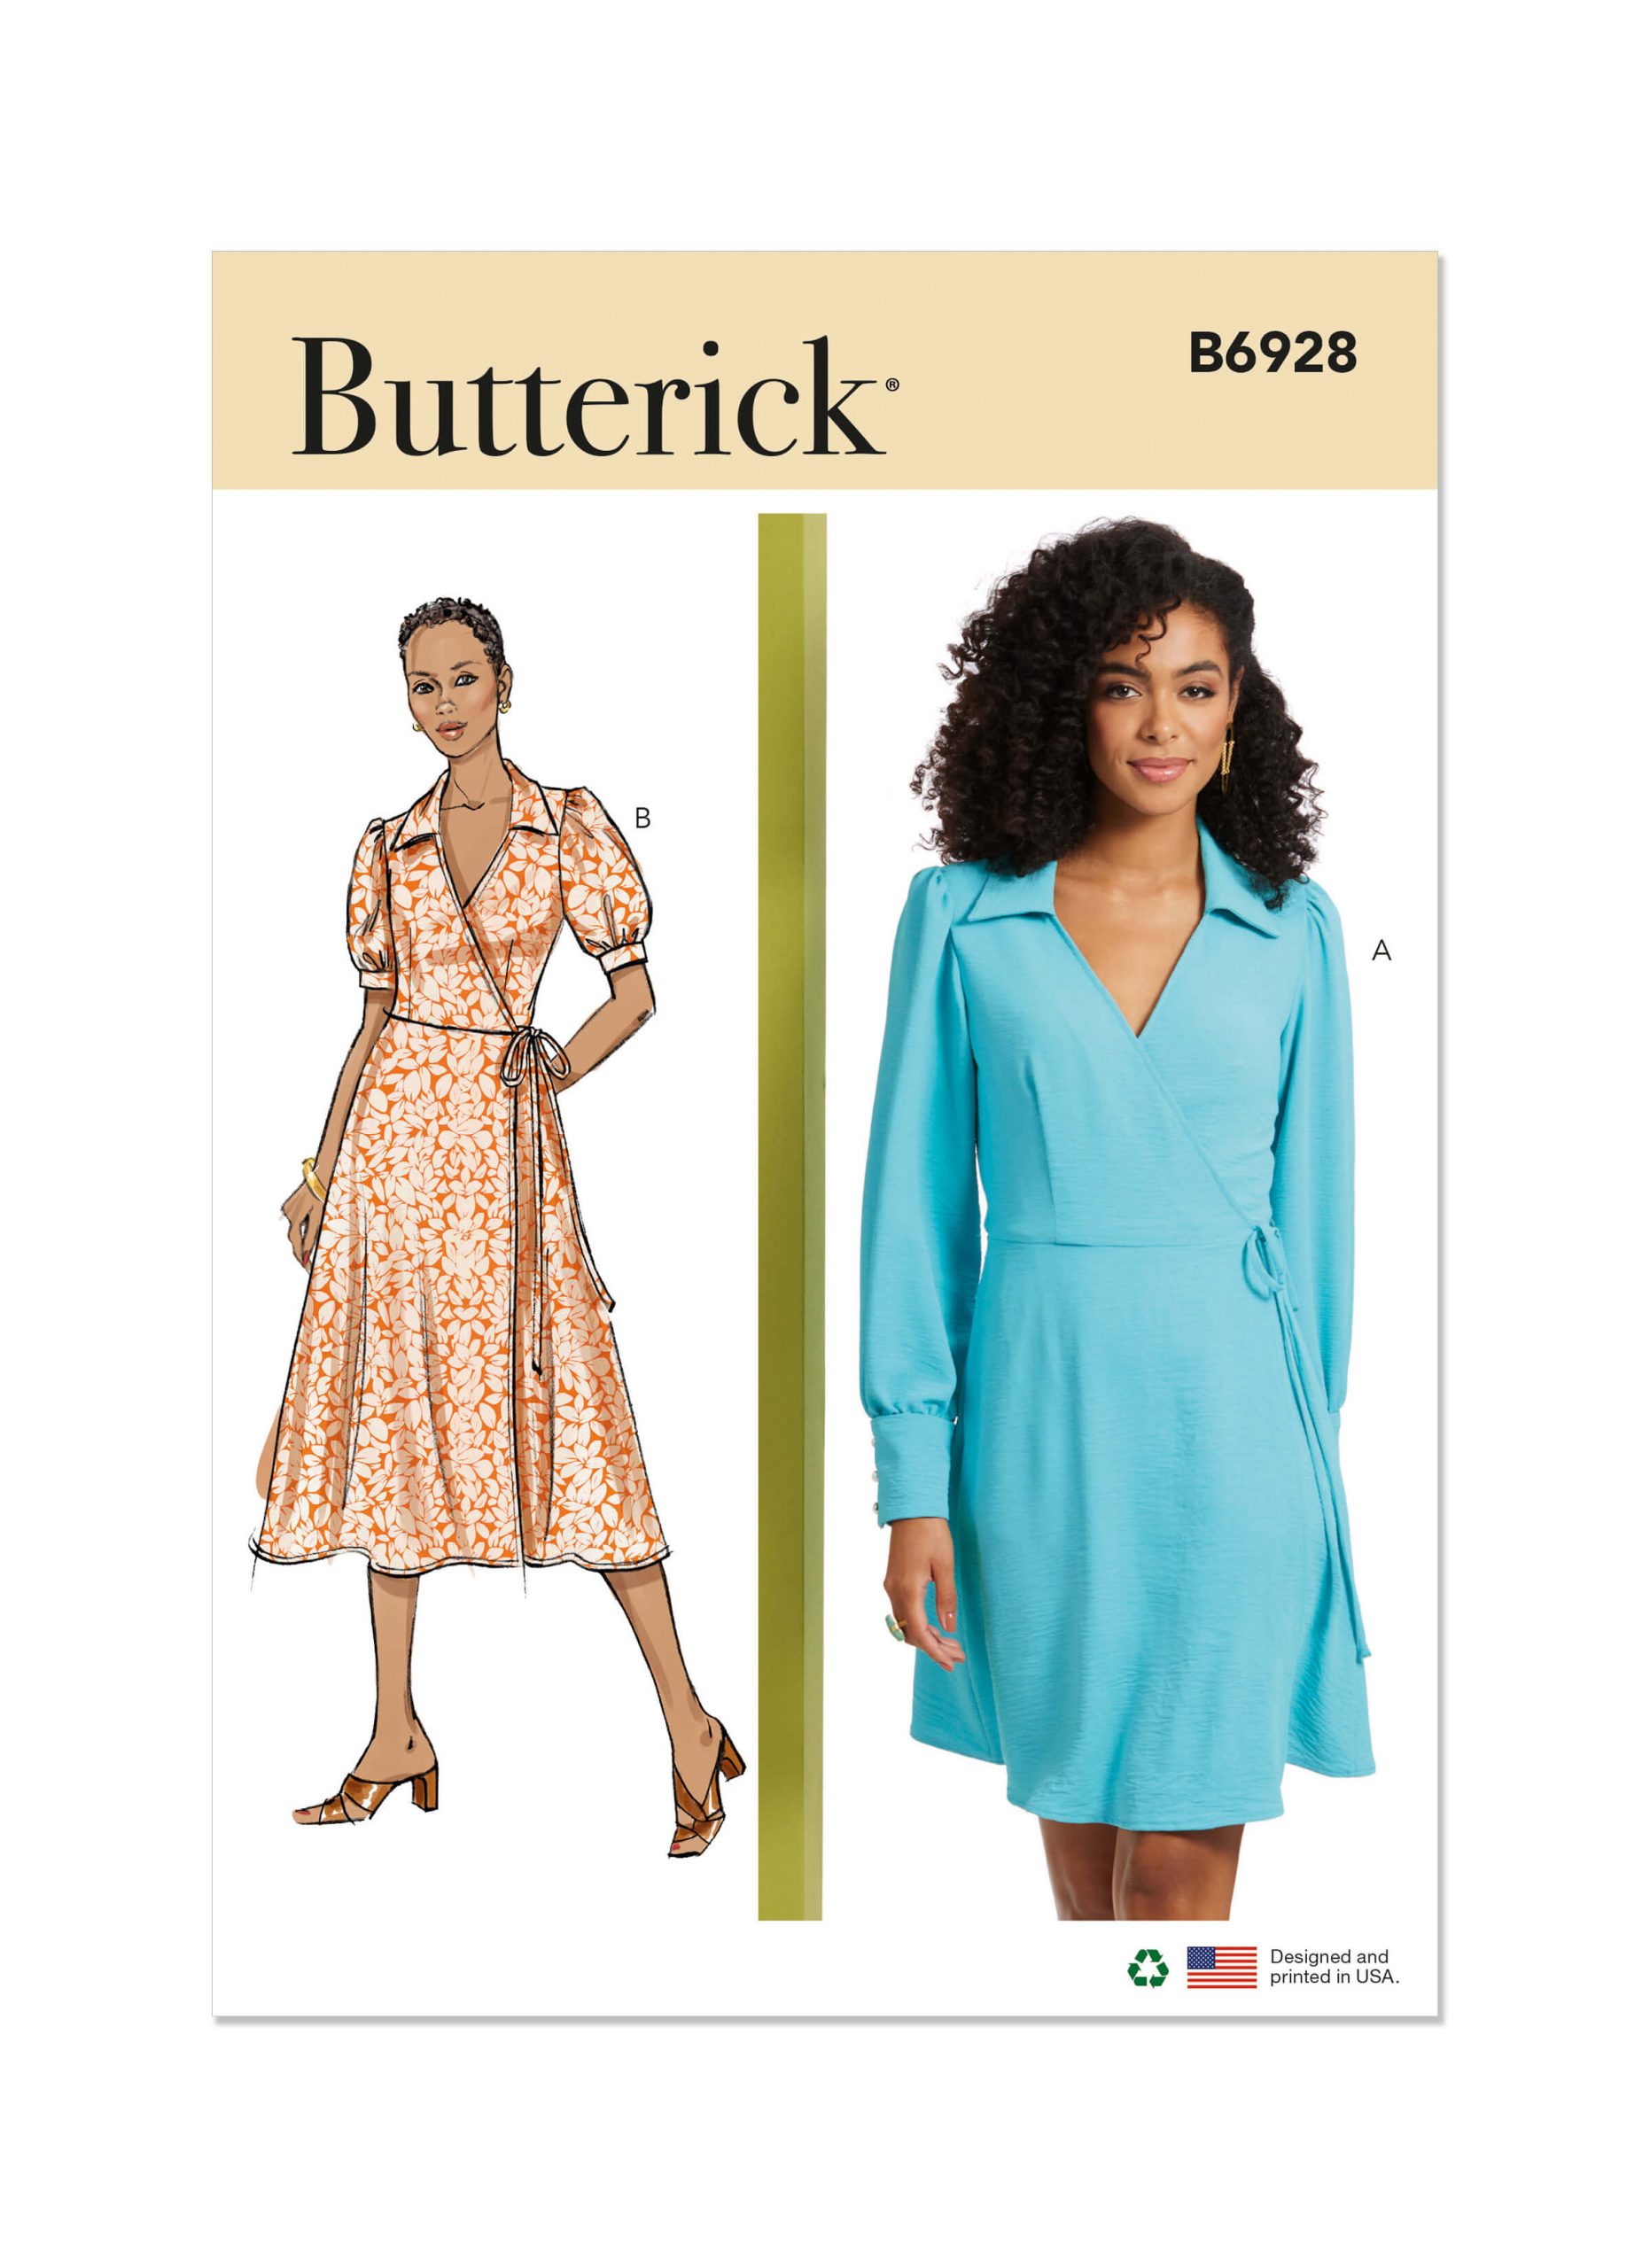 Butterick Sewing Pattern B6928 Misses' Dress in Two Lengths